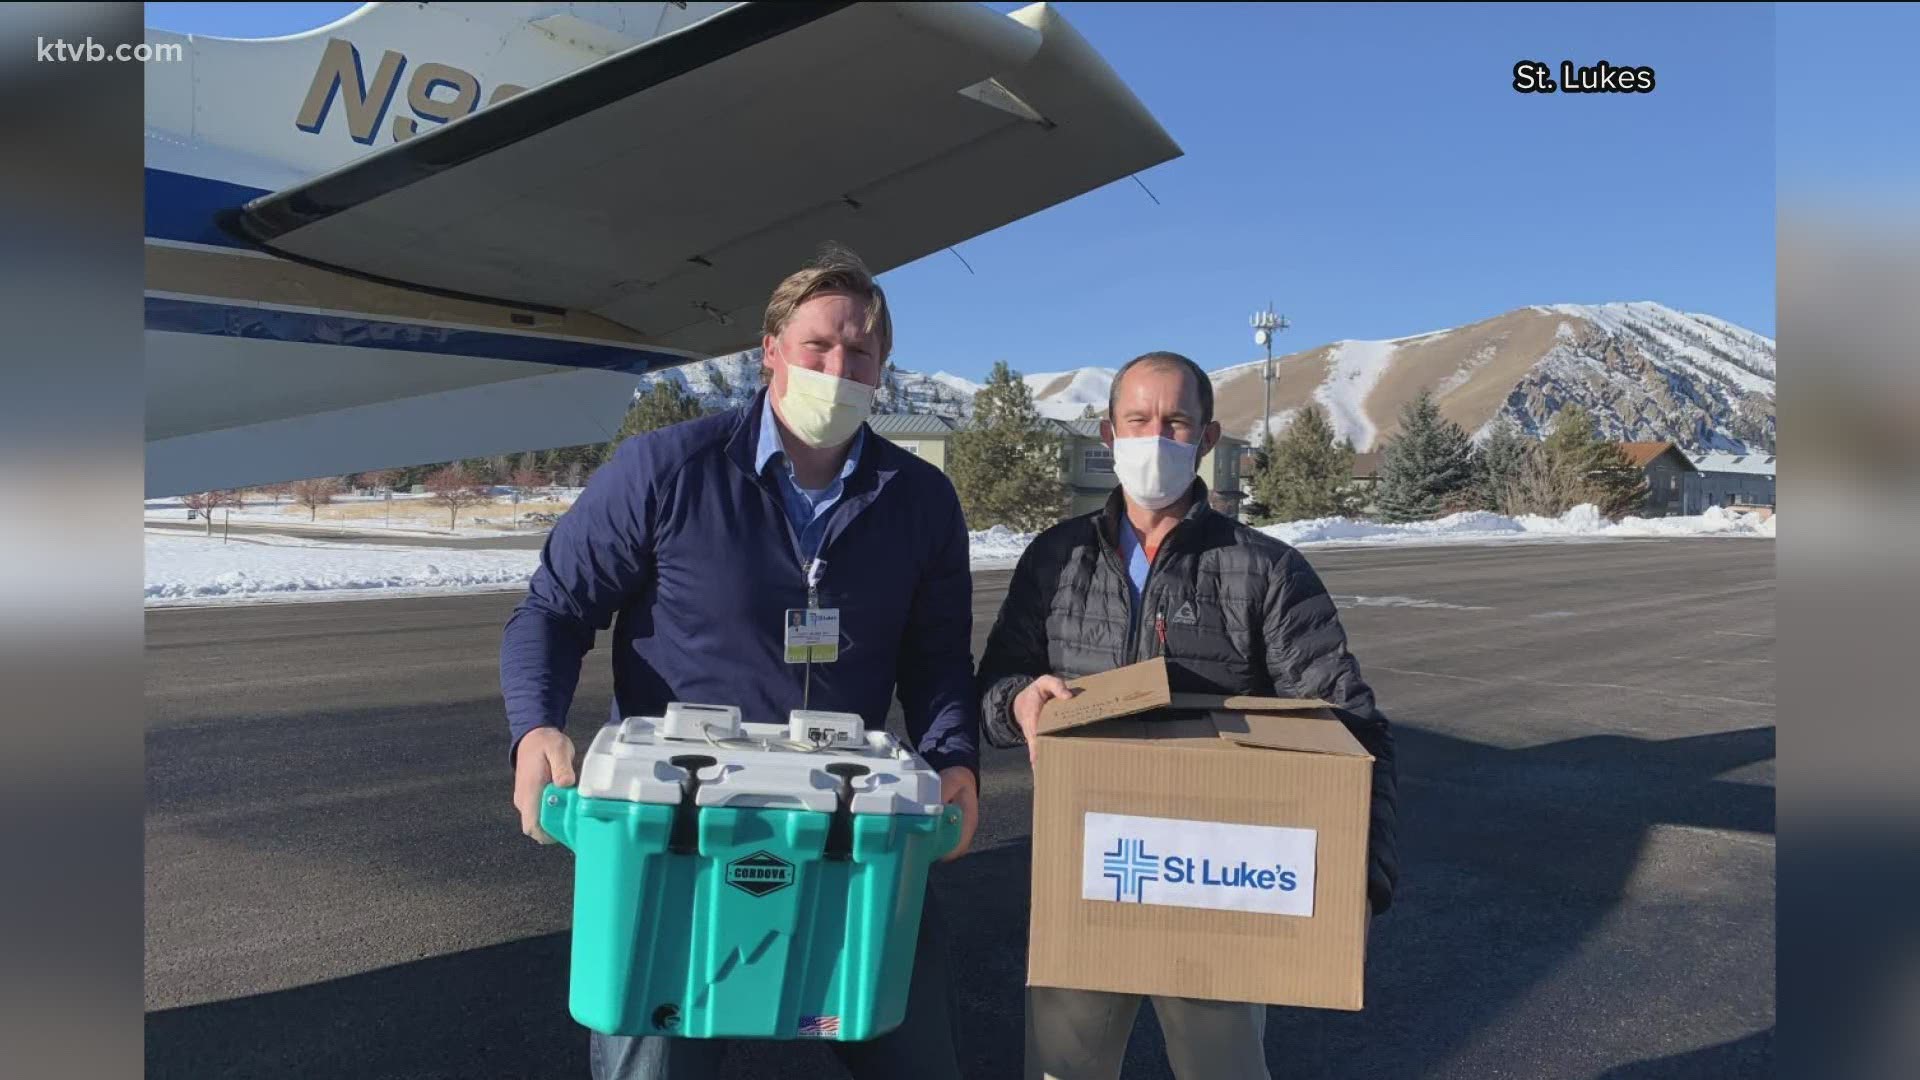 Cordova Outdoors in Nampa and the Idaho company PharmaWatch are teaming up with St. Luke's to ensure Idaho's vaccine rollout remains on schedule.